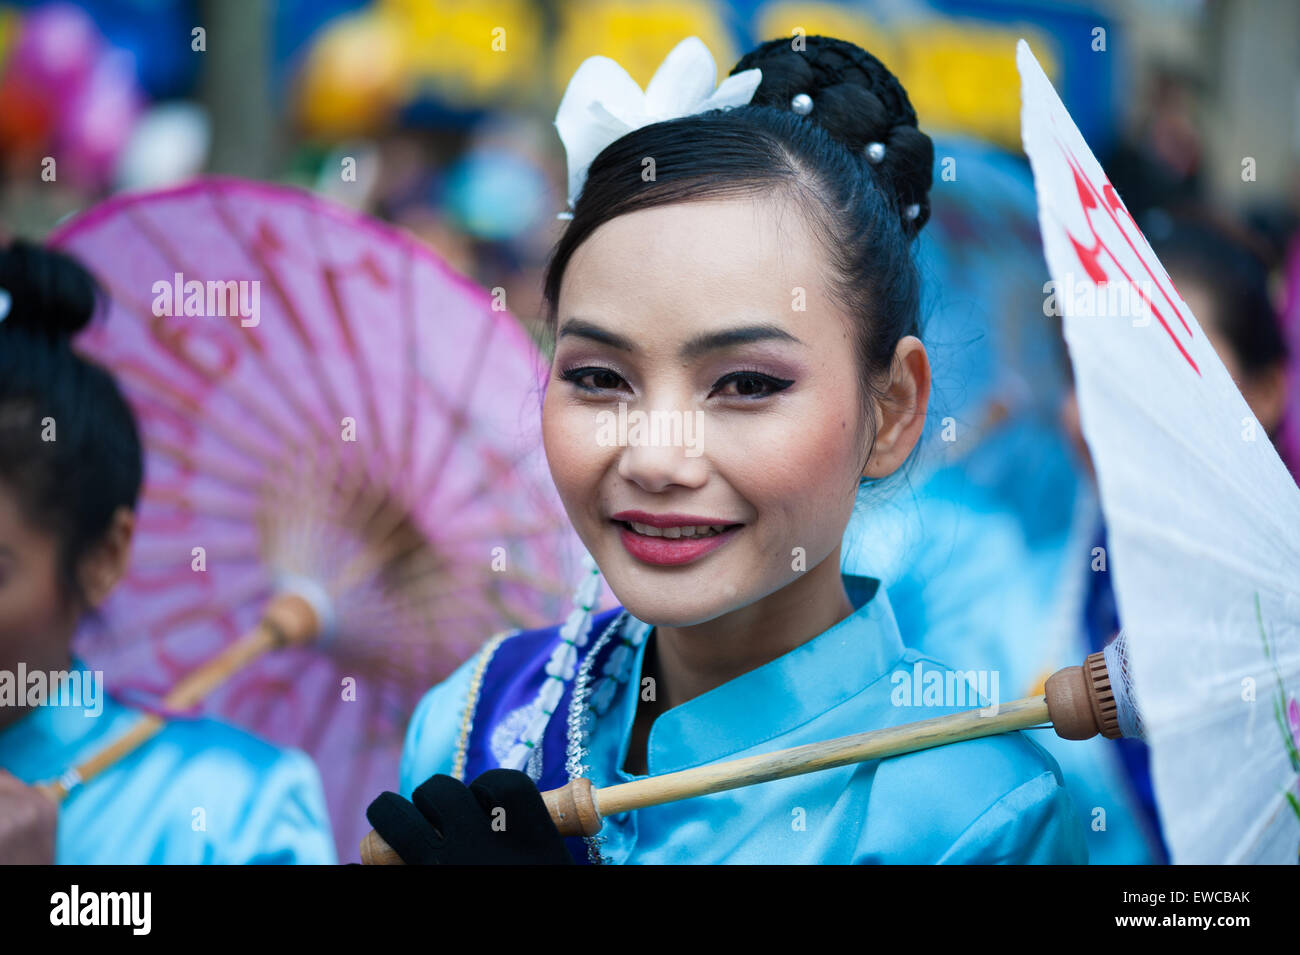 Paris - February 17, 2013: Beautiful Chinese girl parades at the Lunar New Year Festival. Stock Photo